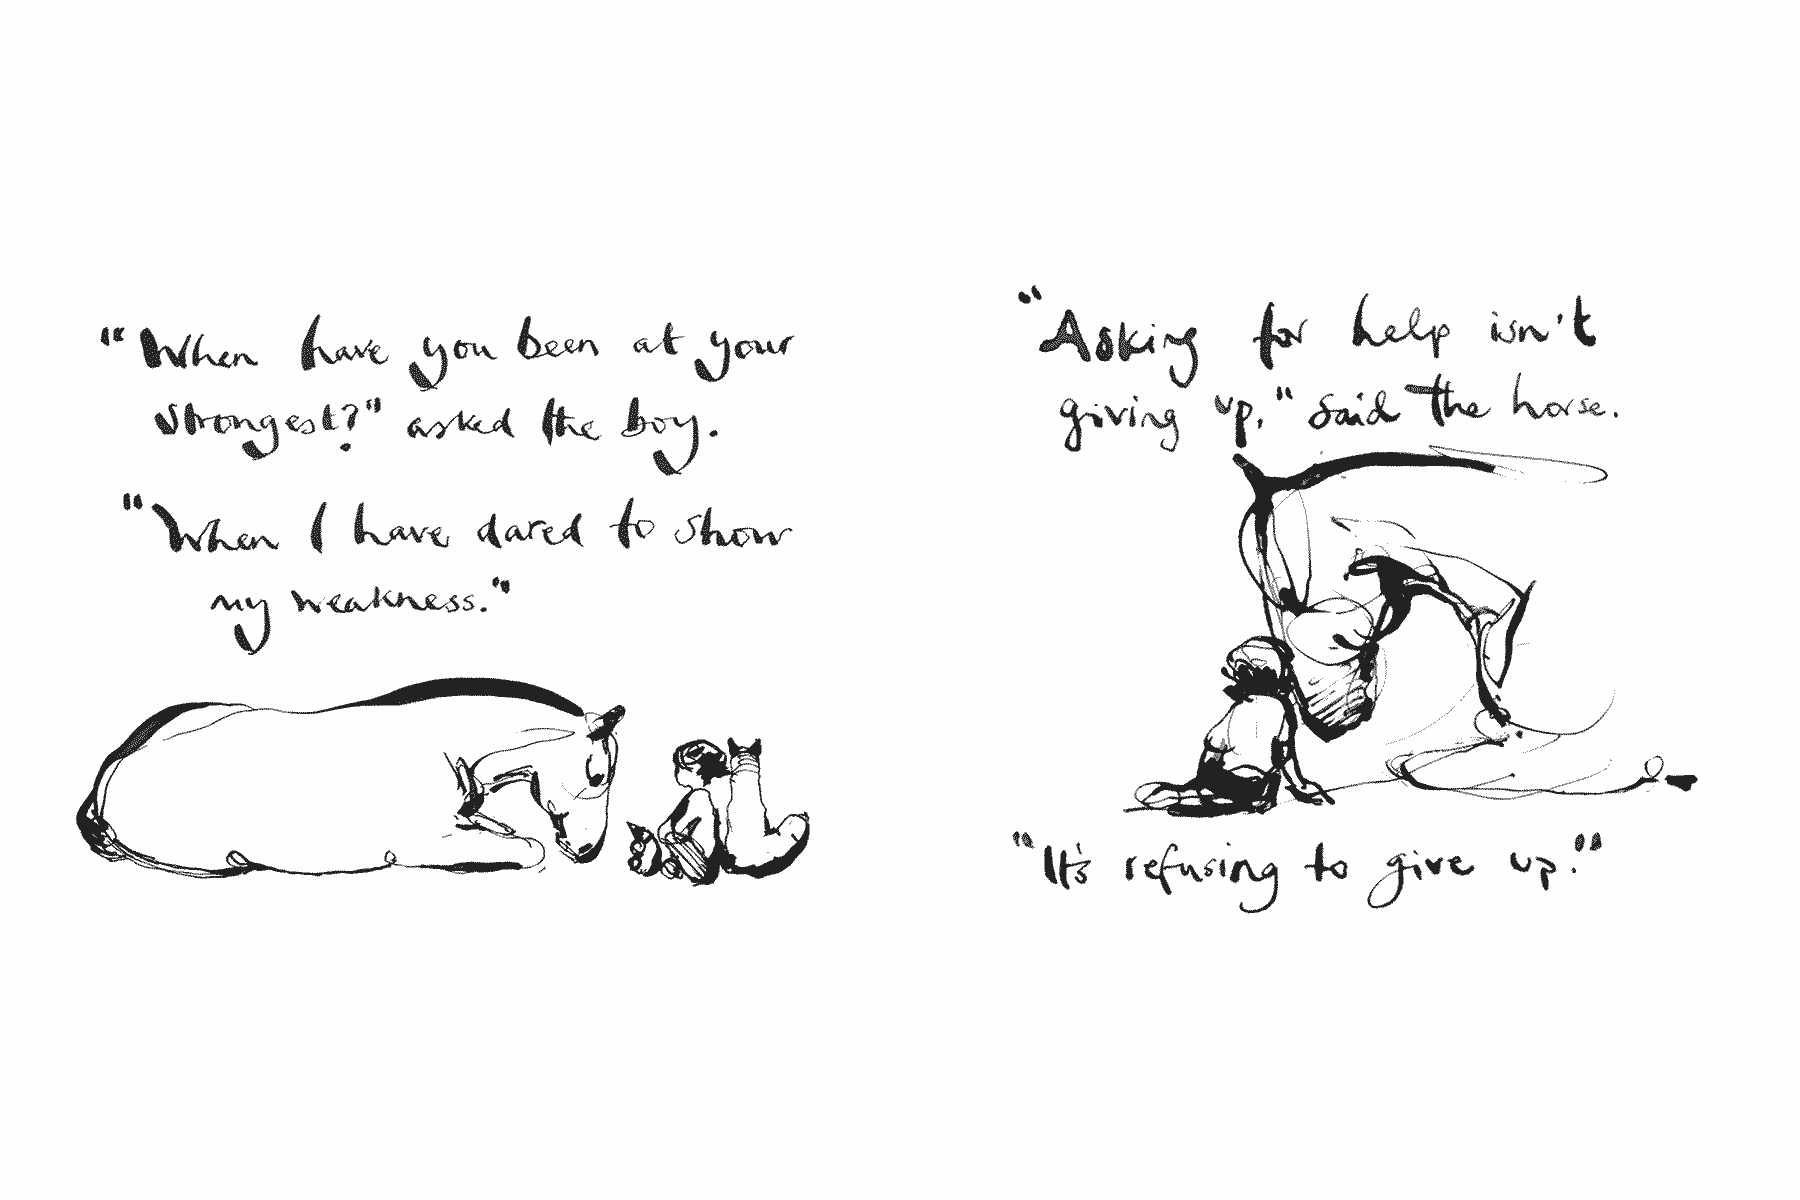 Page from Charlie Mackesy's The Boy, the Mole, the Fox and the Horse